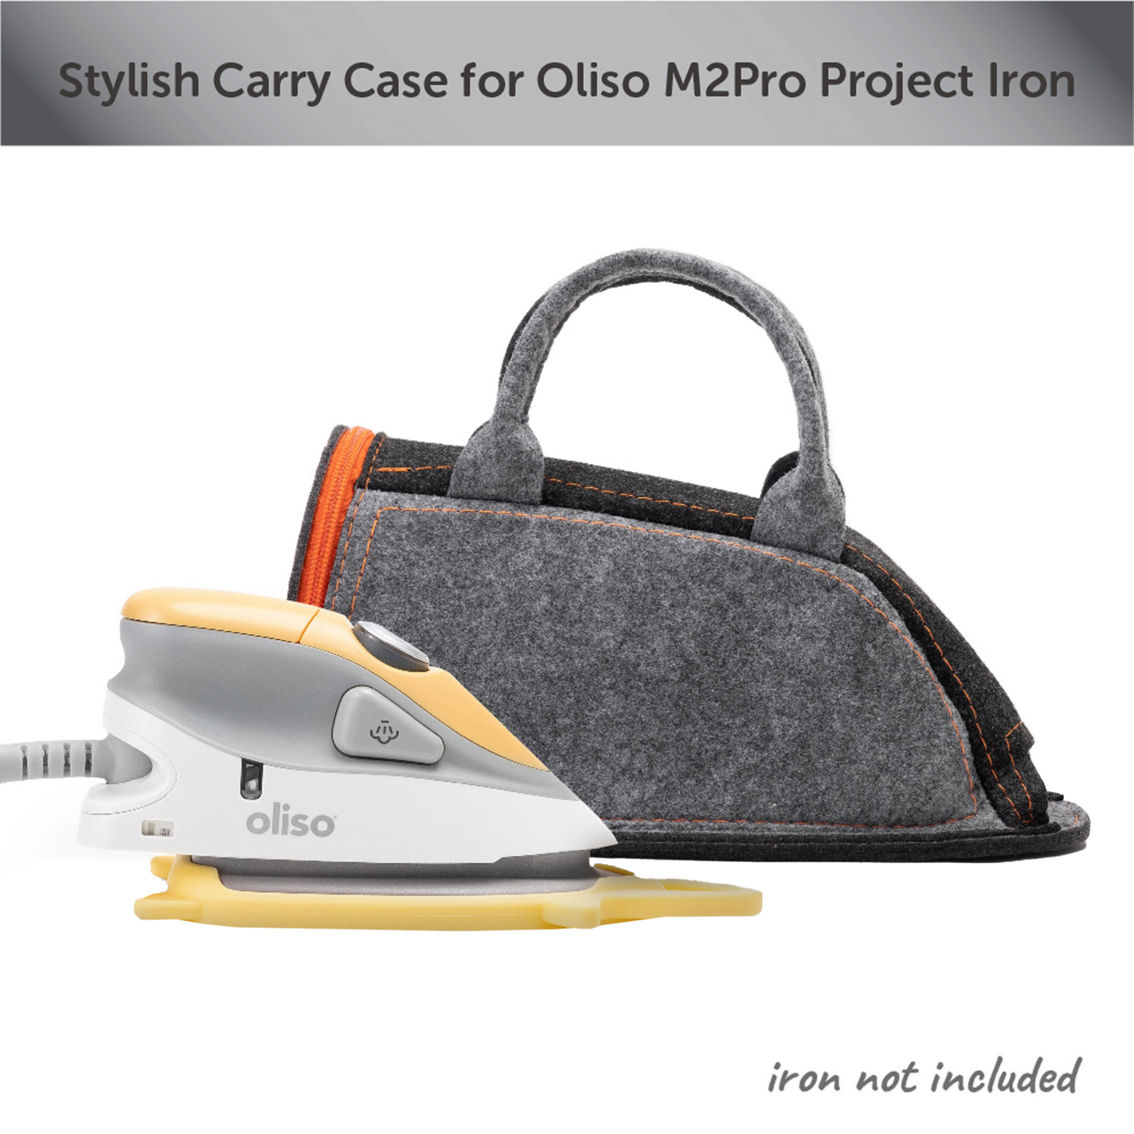 Oliso Small Carry Bag for M2Pro Mini Project Iron - Image 2 of 6